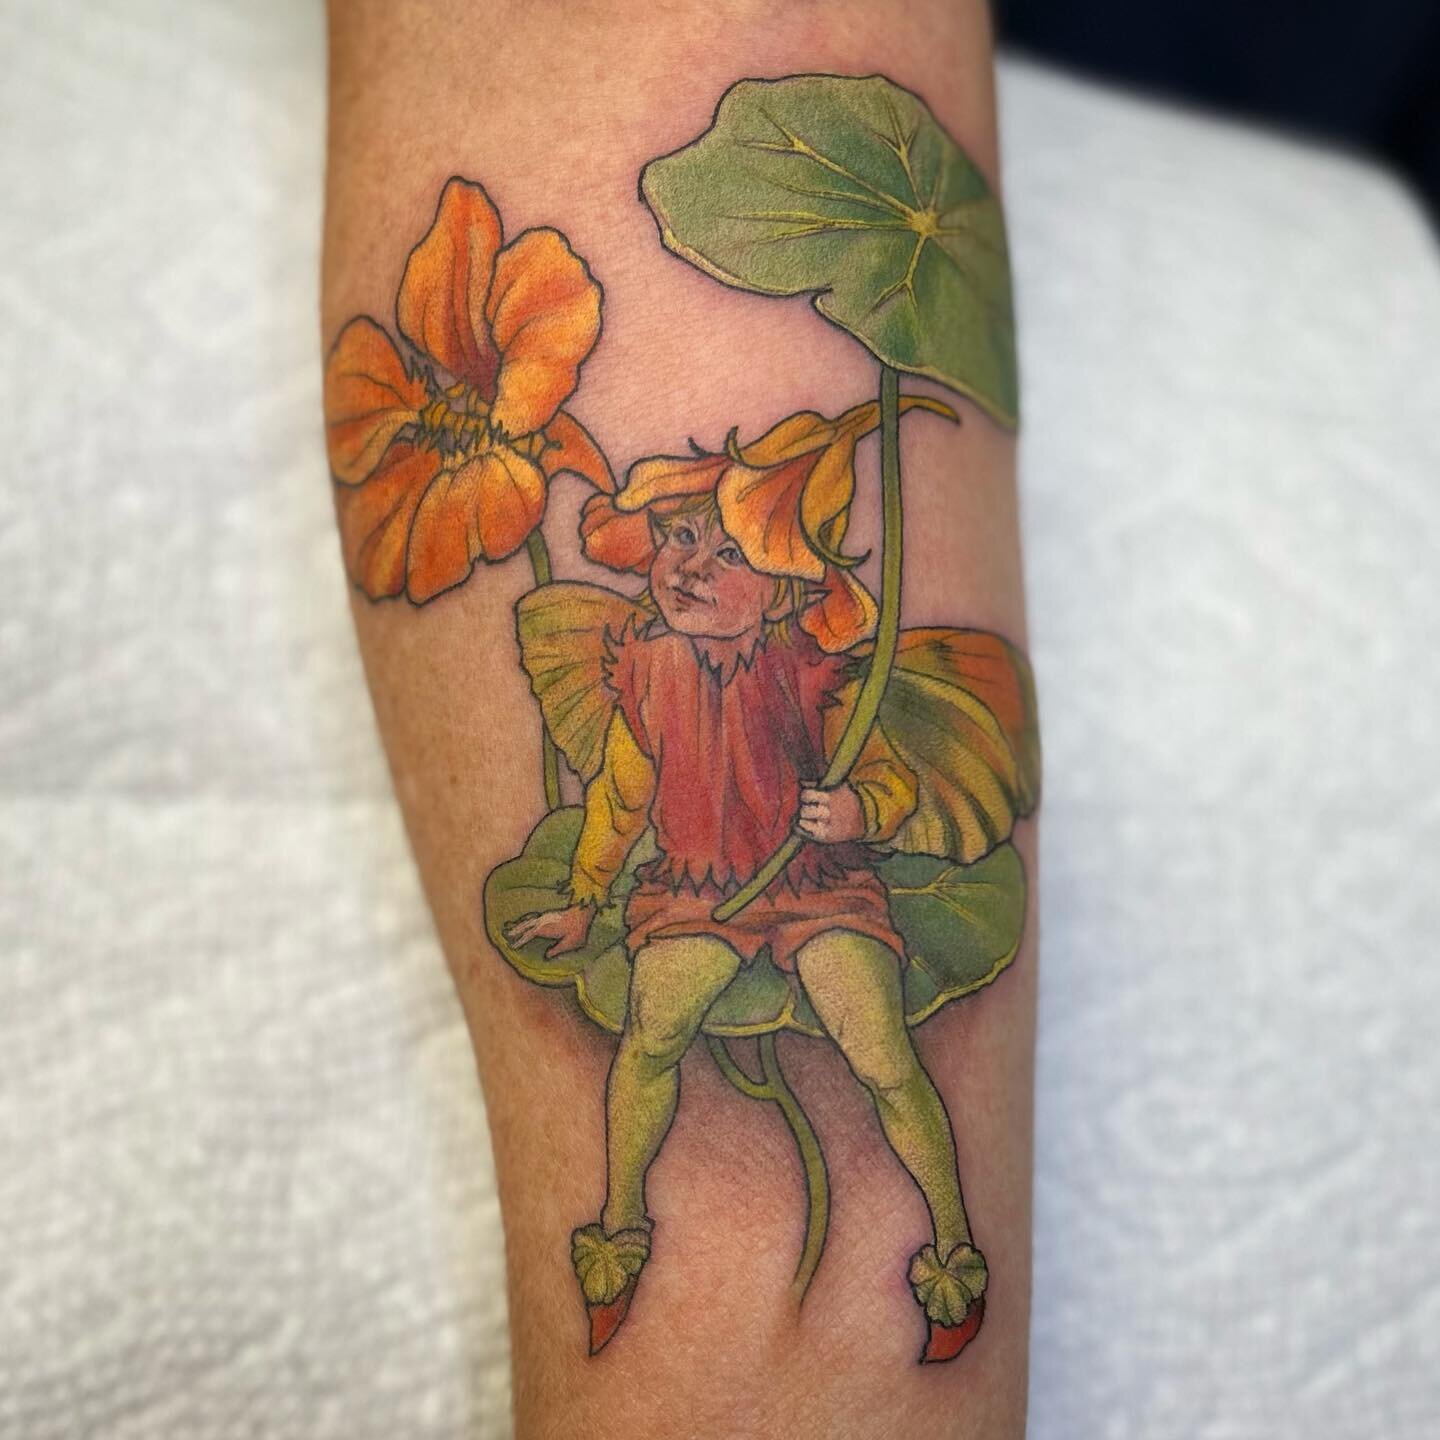 I had the very special treat of giving my mom her Mother&rsquo;s Day present early this year- a lil Cicely Mary Barker portrait of my son! Truly the most meaningful tattoo I&rsquo;ve ever done or probably ever will do. Thanks for everything Mama, I l